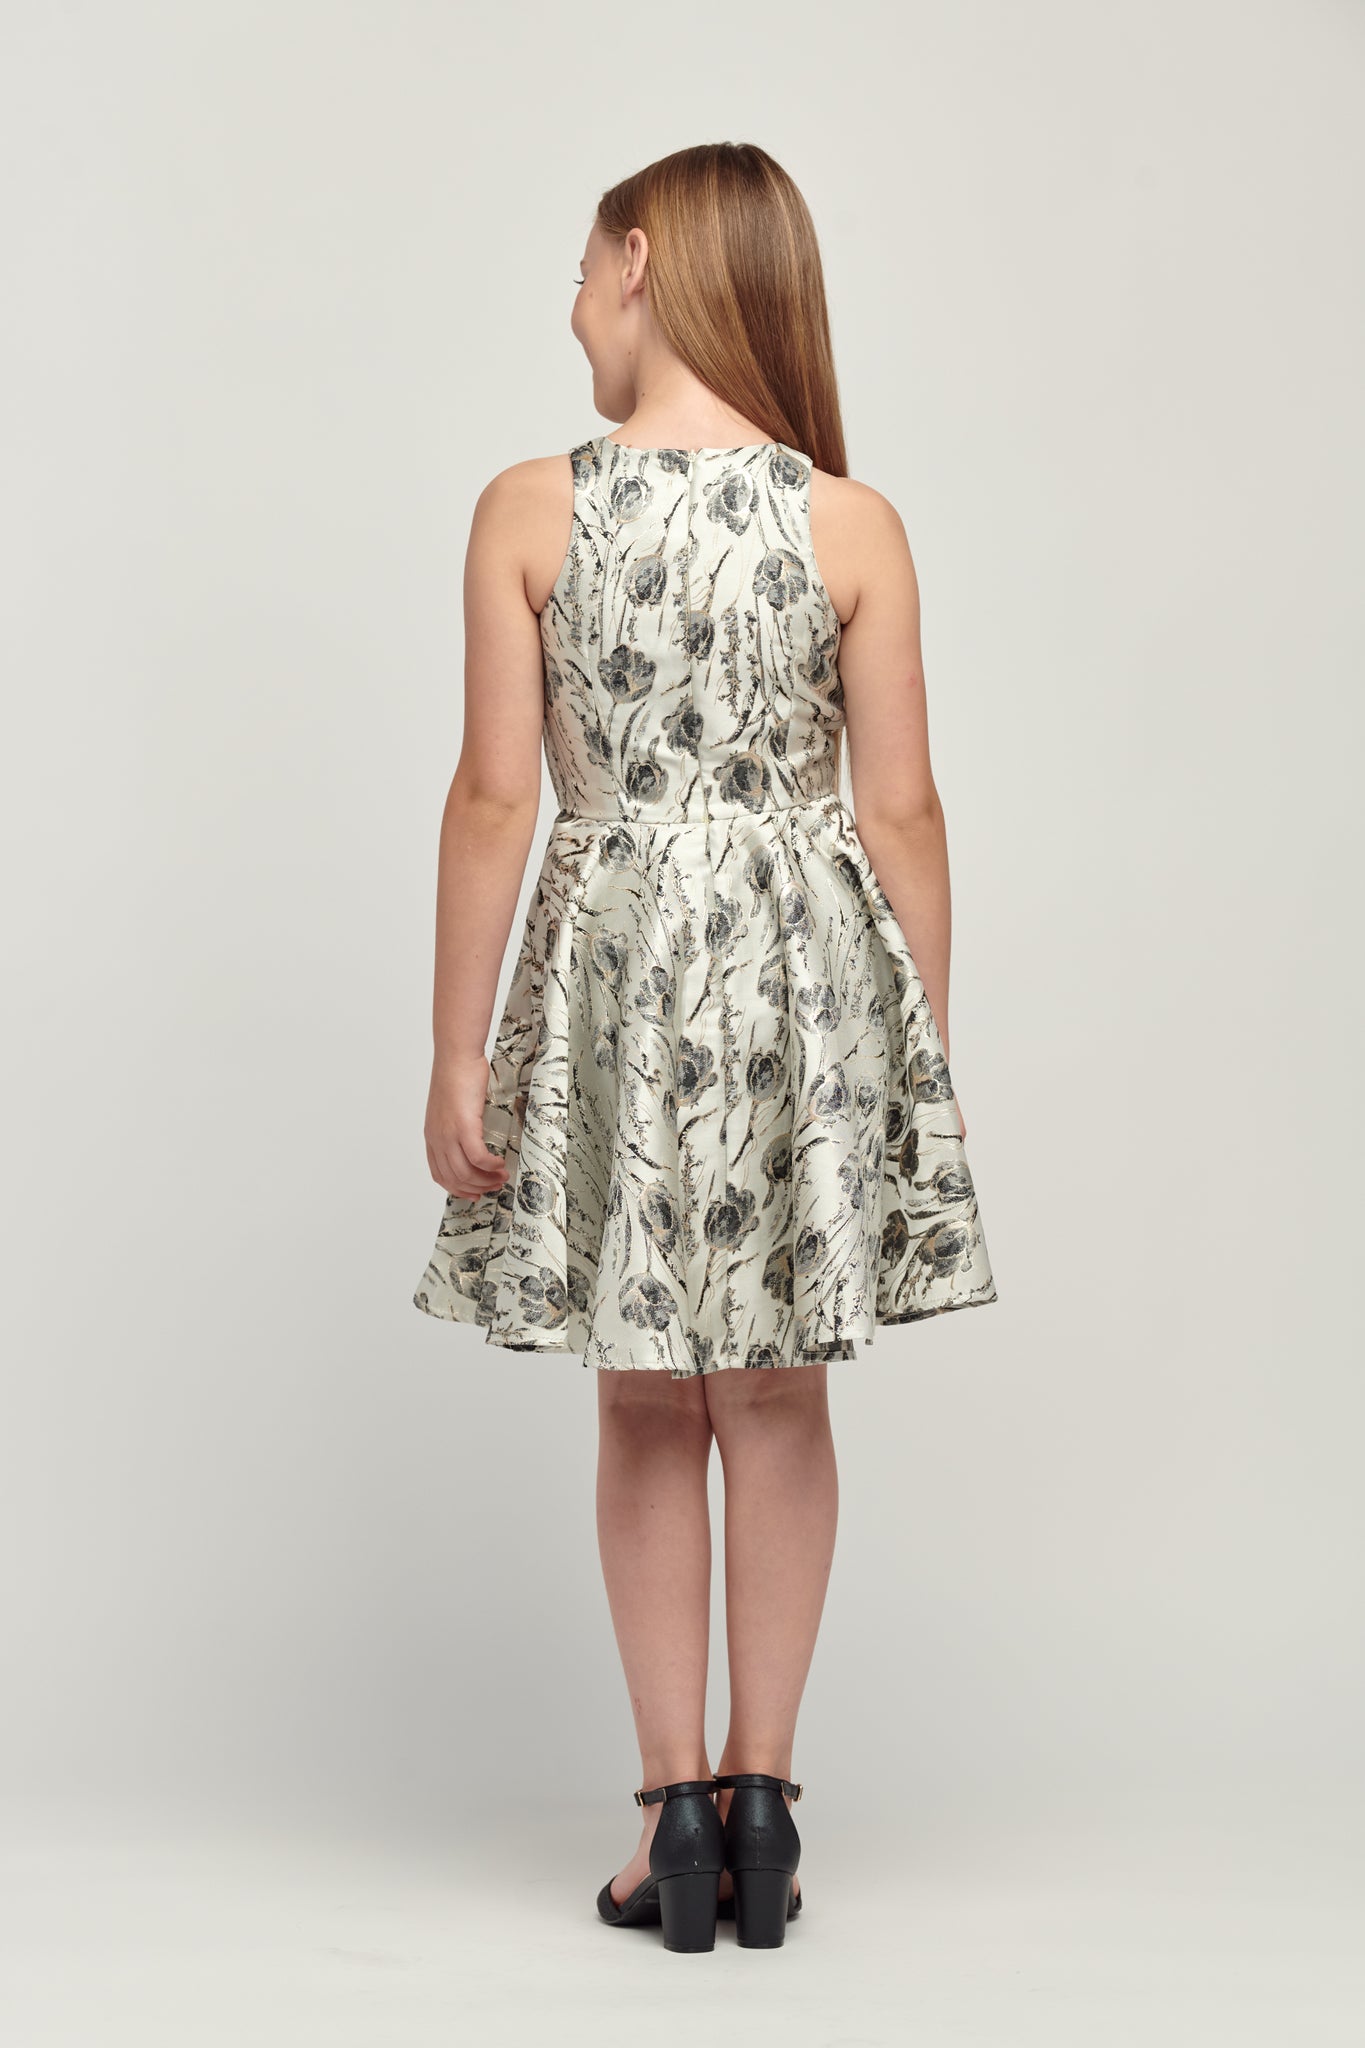 Back of black and silver floral jacquard racerback dress in longer length featuring a high neckline, high waist detailing and full circle skirt. This dress can be worn with a sports bra as the back covers most of the back.